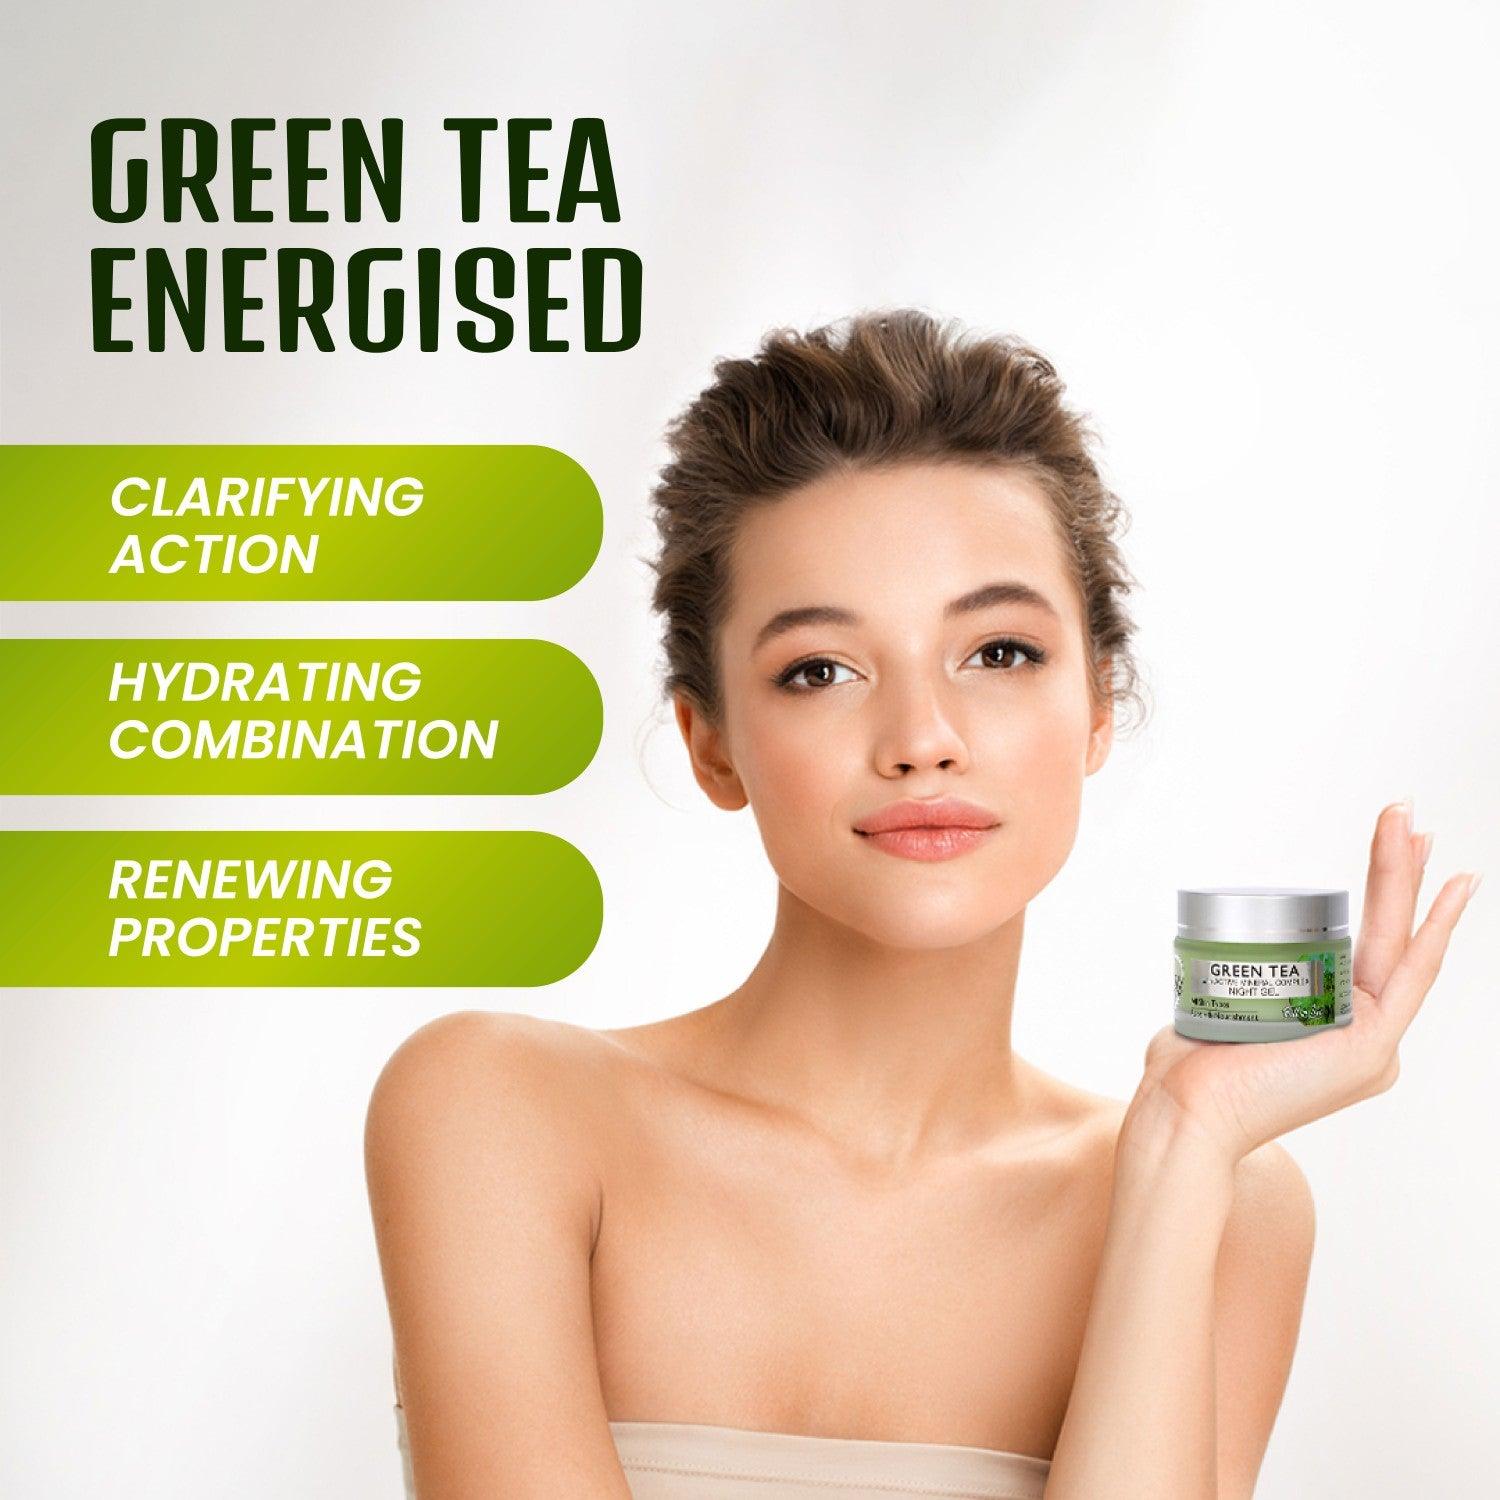 Hi9 Green Tea with Active Mineral Complex Night Gel for Glowing &amp; Hydrating Skin, 50gm - Myhi9